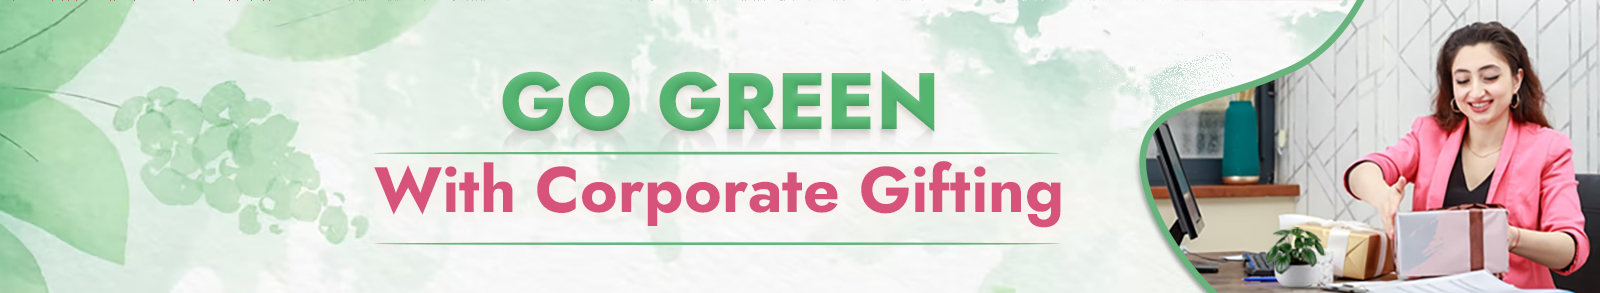 Go Green With Corporate Gifting